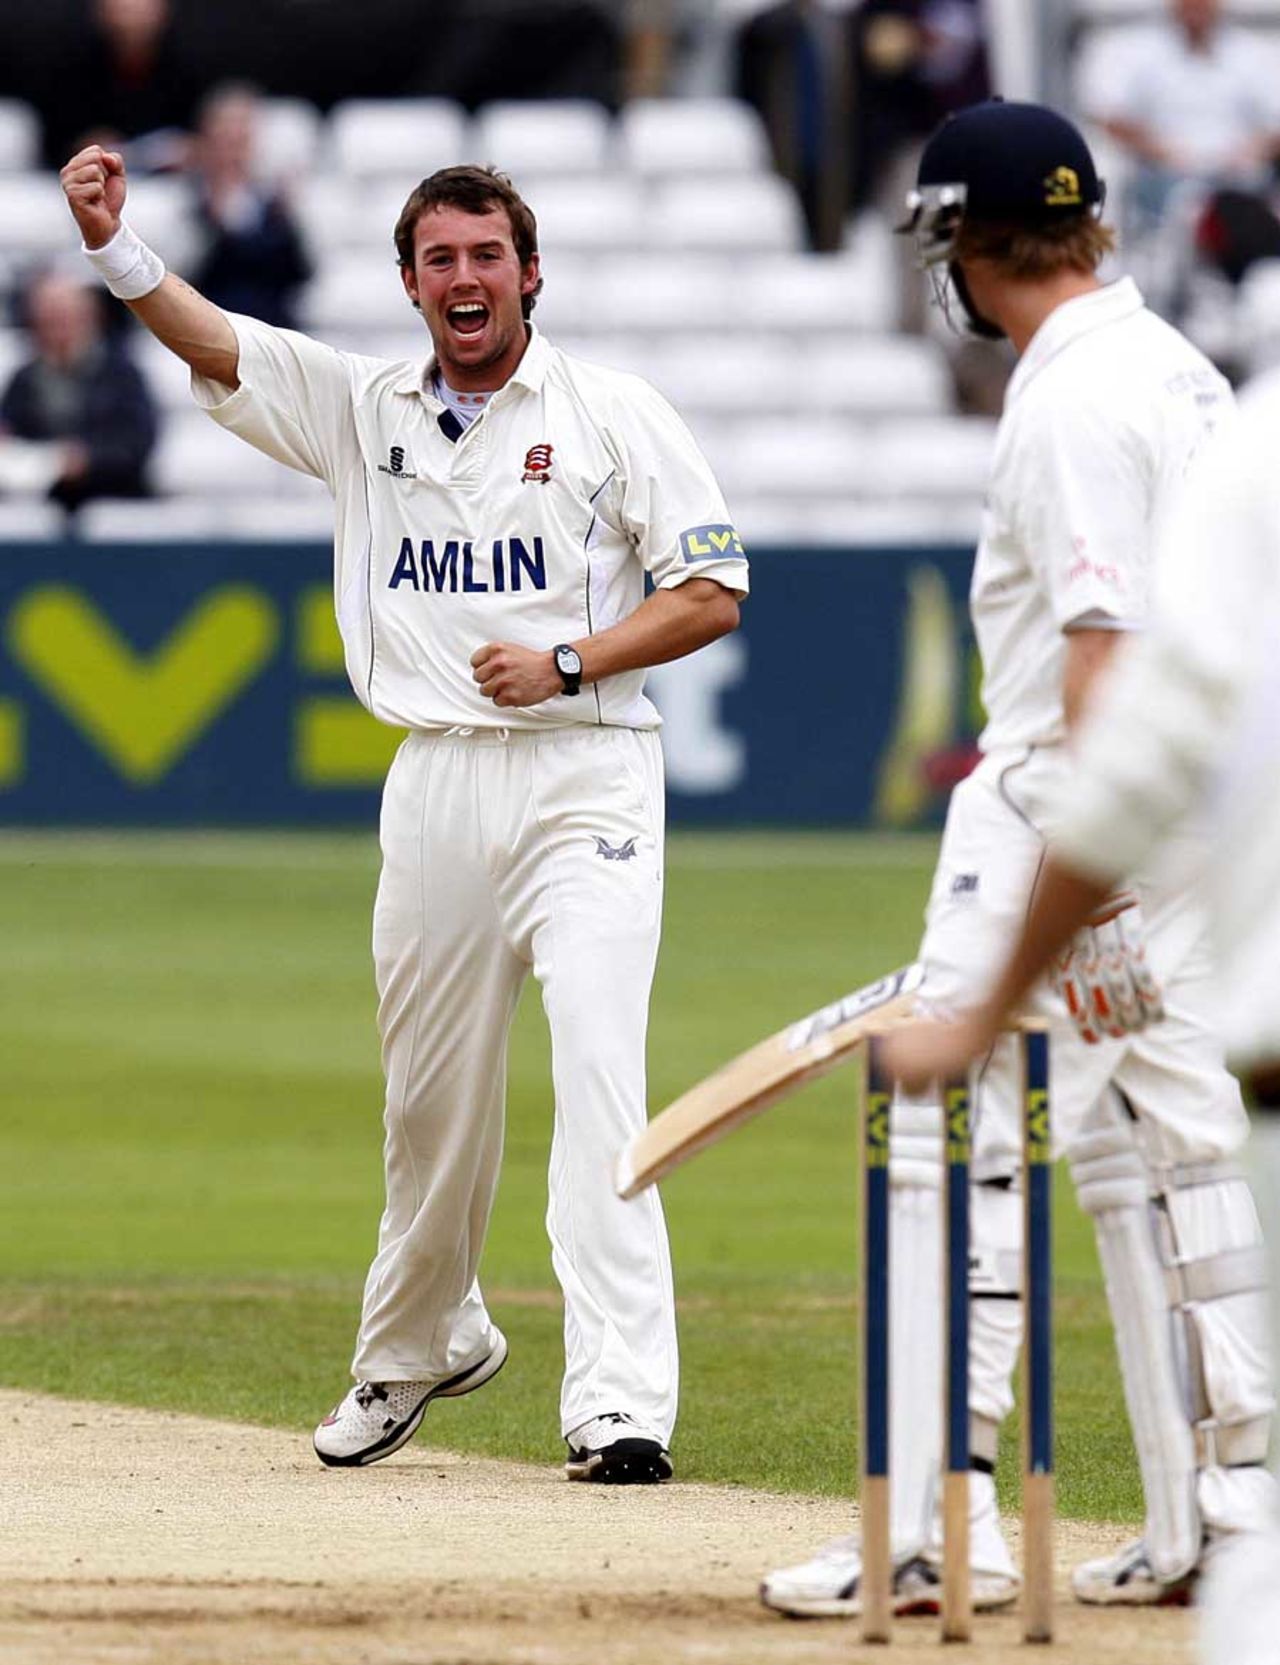 Tony Palladino made early inroads into Durham, Essex v Durham, County Championship, Division One, Chelmsford, September 8, 2010